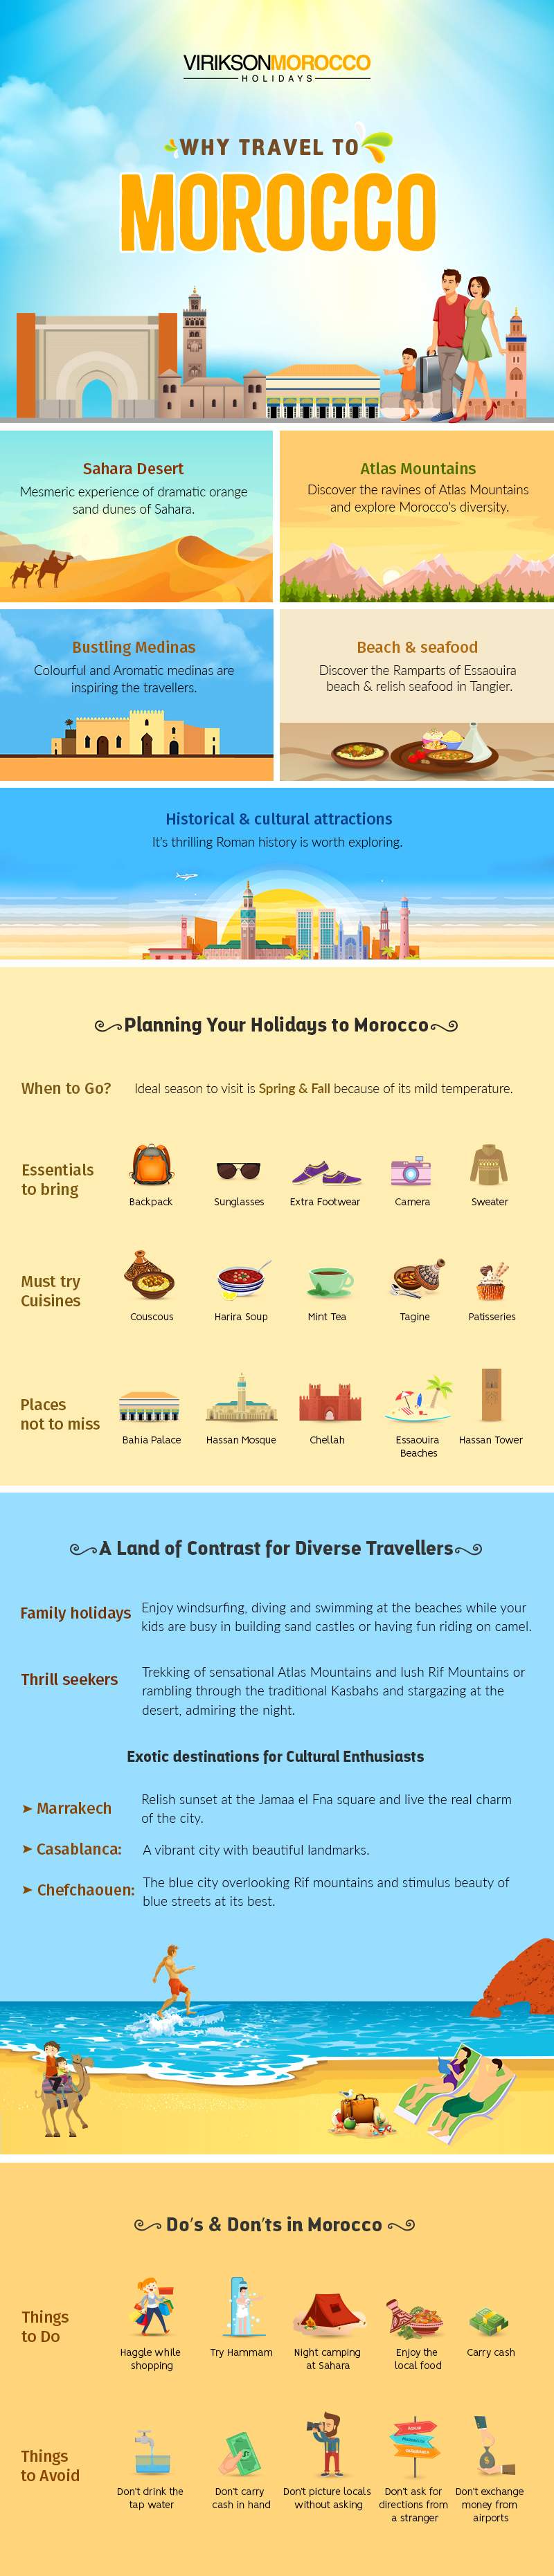 Guide to Perfect Holidays in Morocco